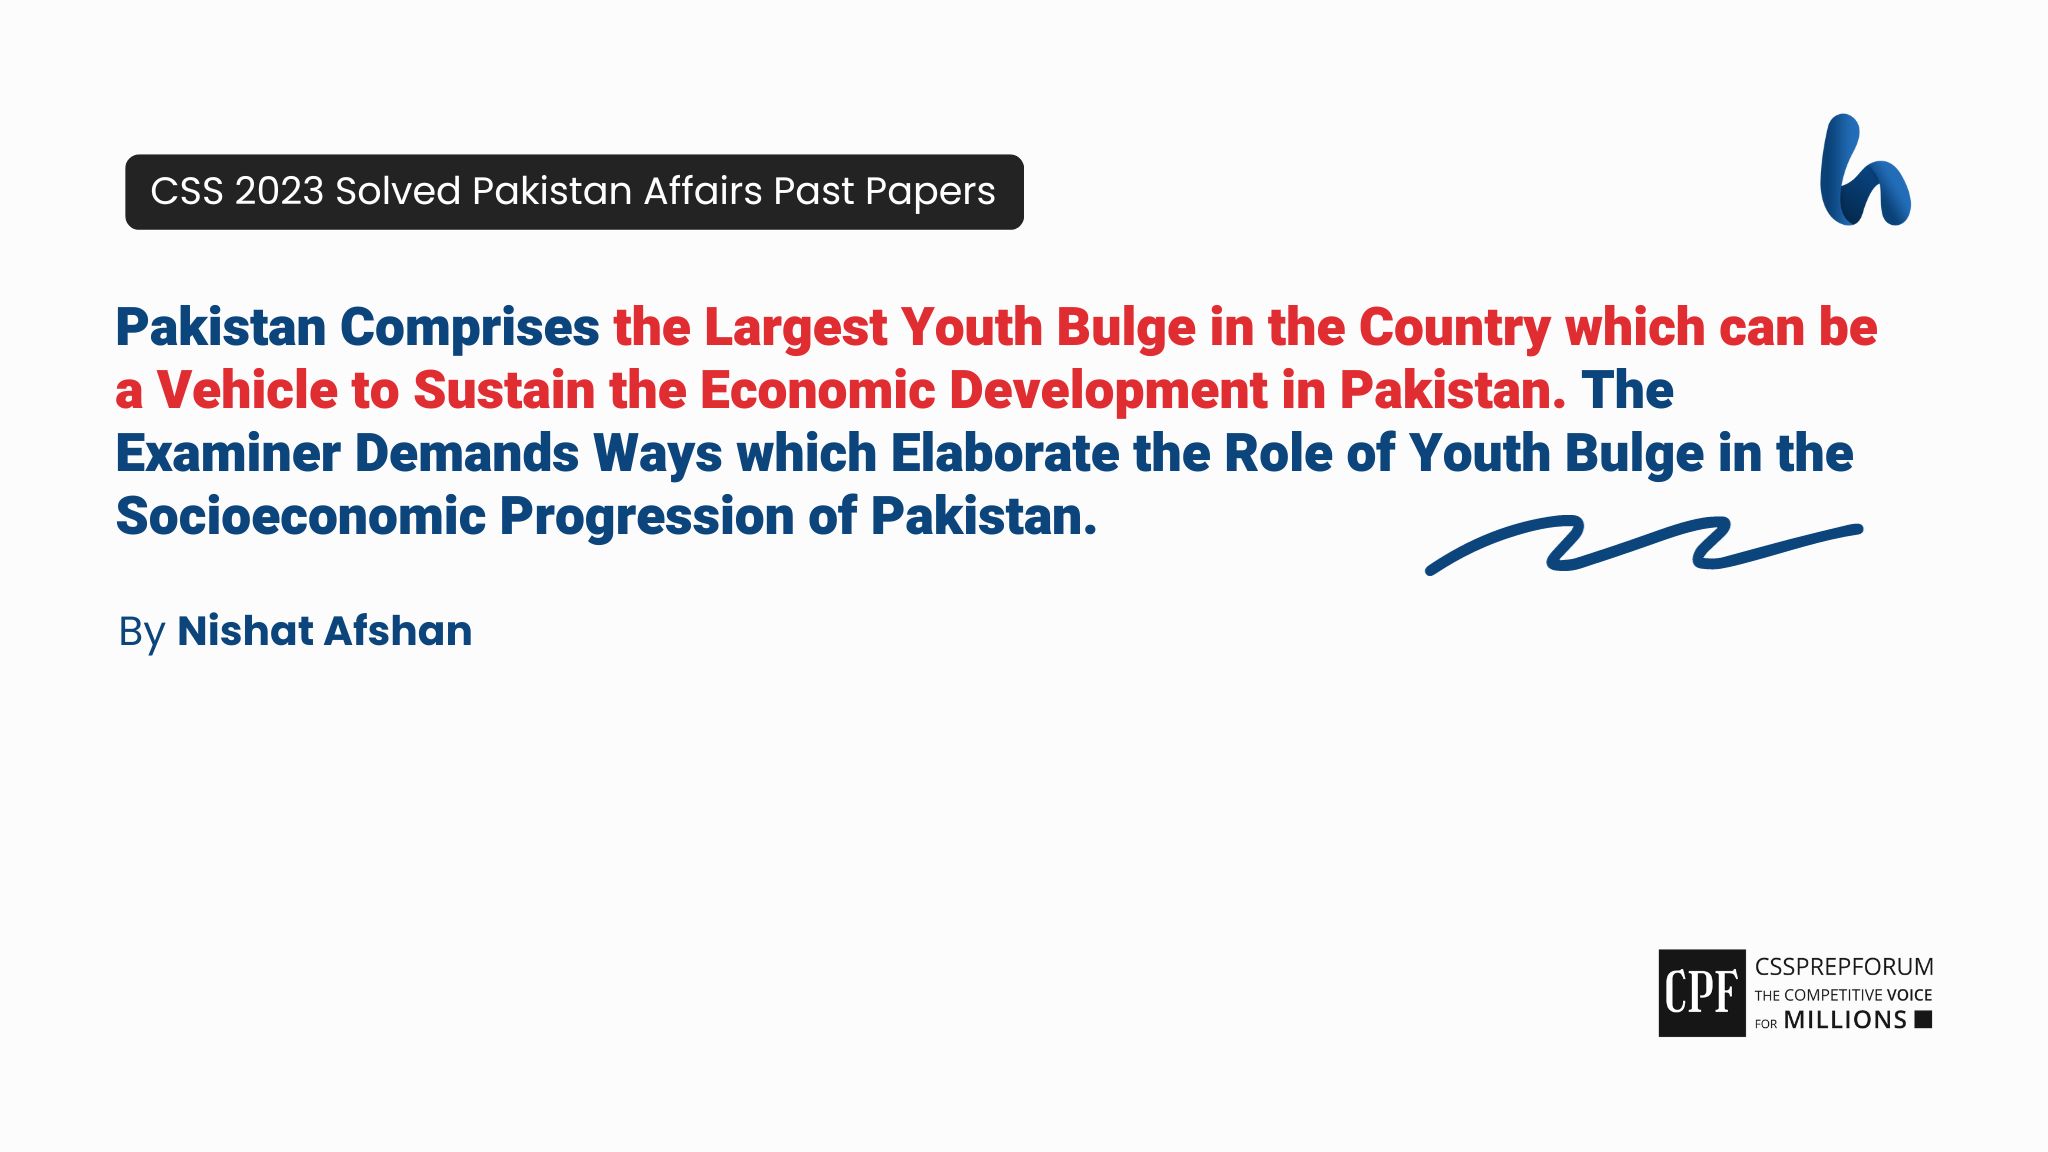 Pakistan Comprises the Largest Youth Bulge in the Country which can be a Vehicle to Sustain the Economic Development in Pakistan. The Examiner Demands Ways